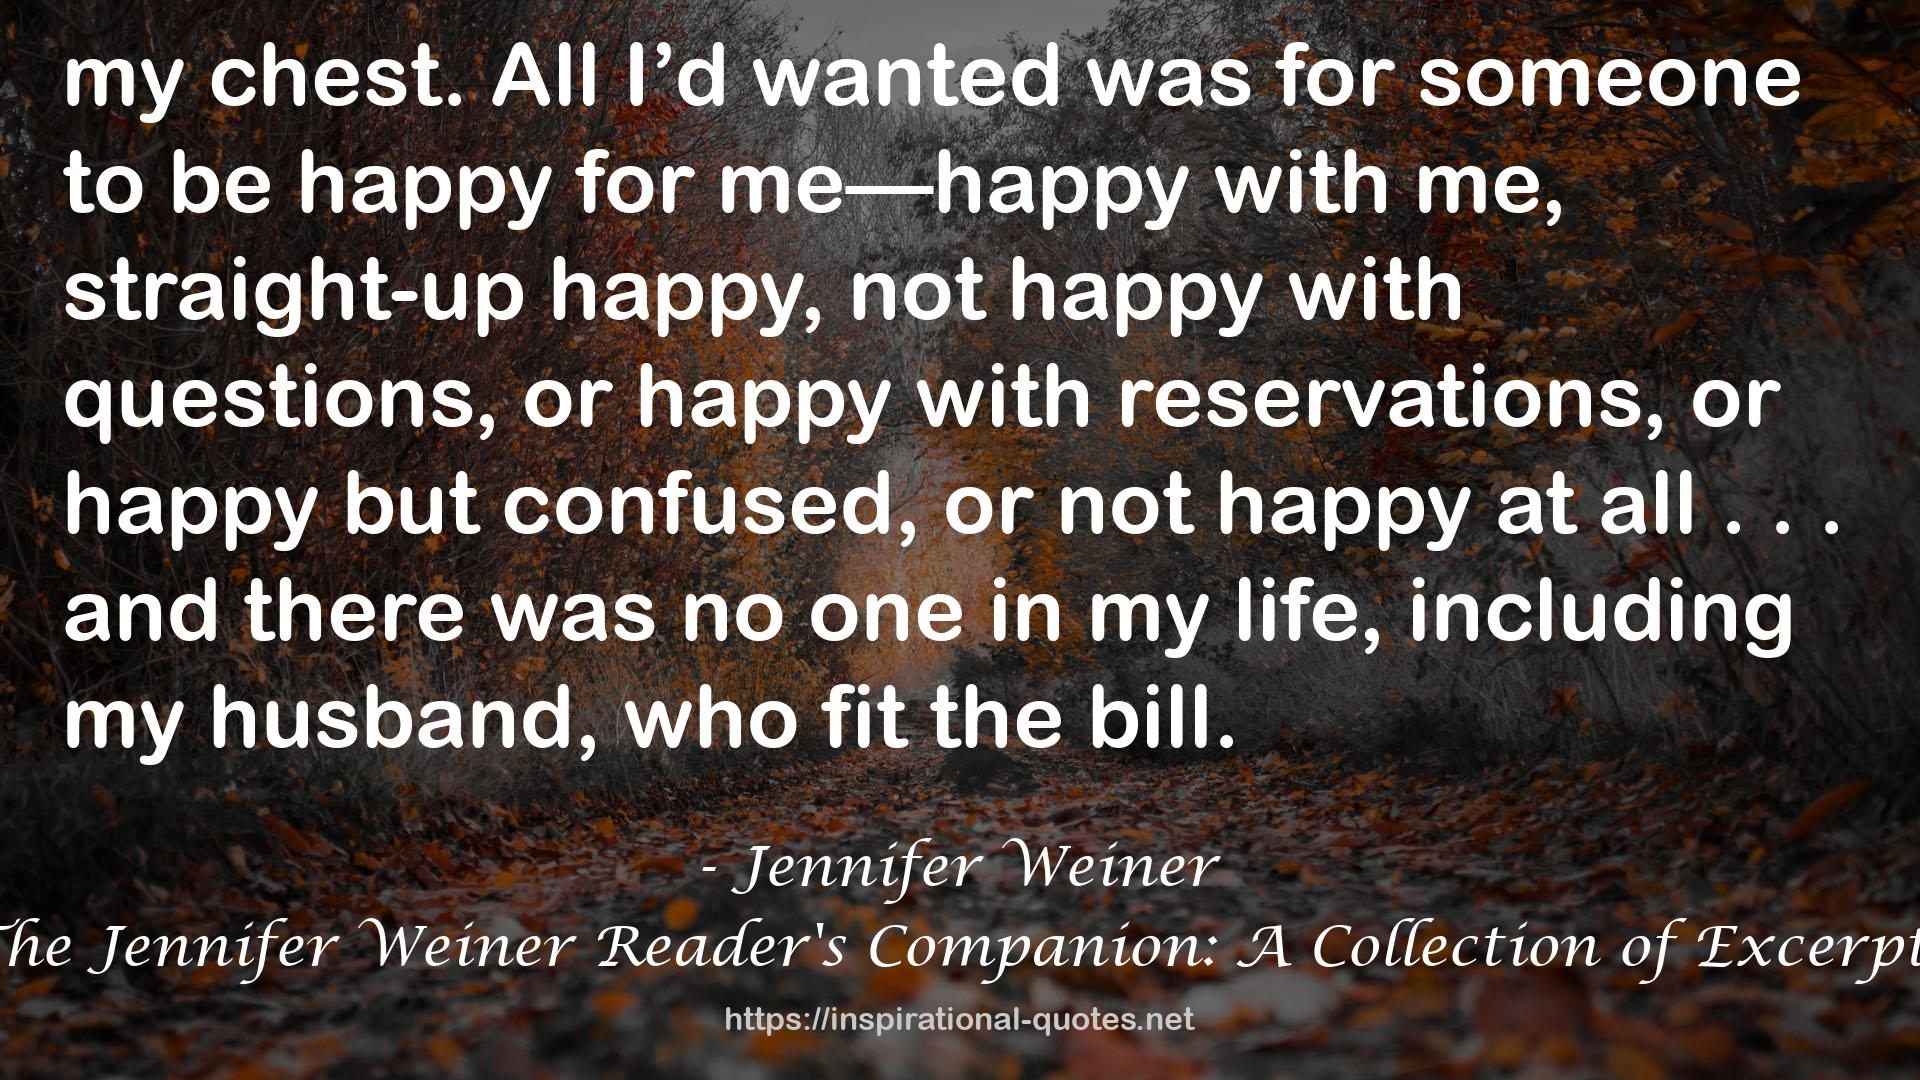 The Jennifer Weiner Reader's Companion: A Collection of Excerpts QUOTES